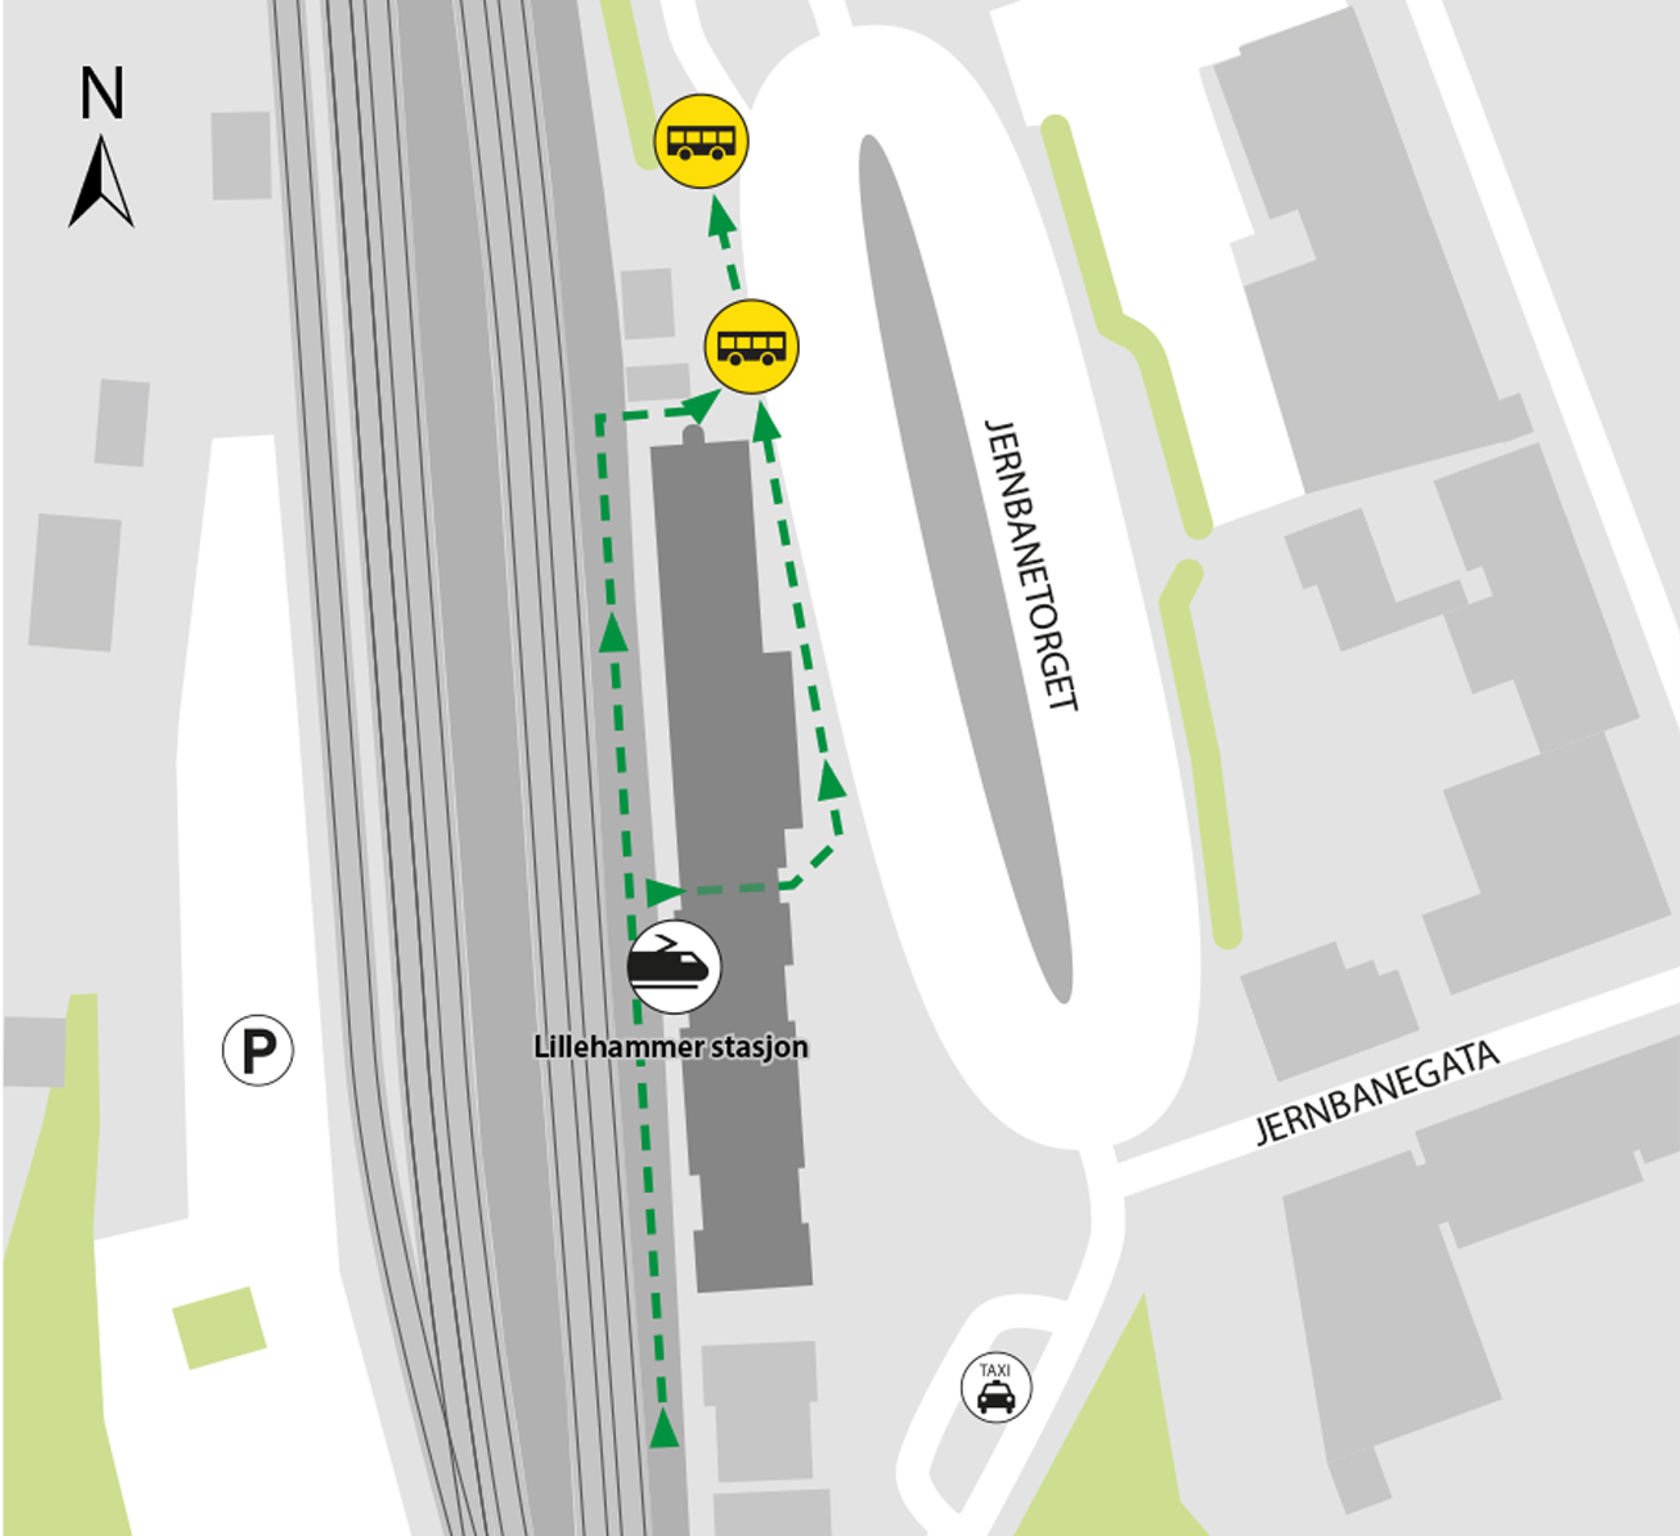 Map shows rail replacement service departs from bus stop at Lillehammer skysstasjon